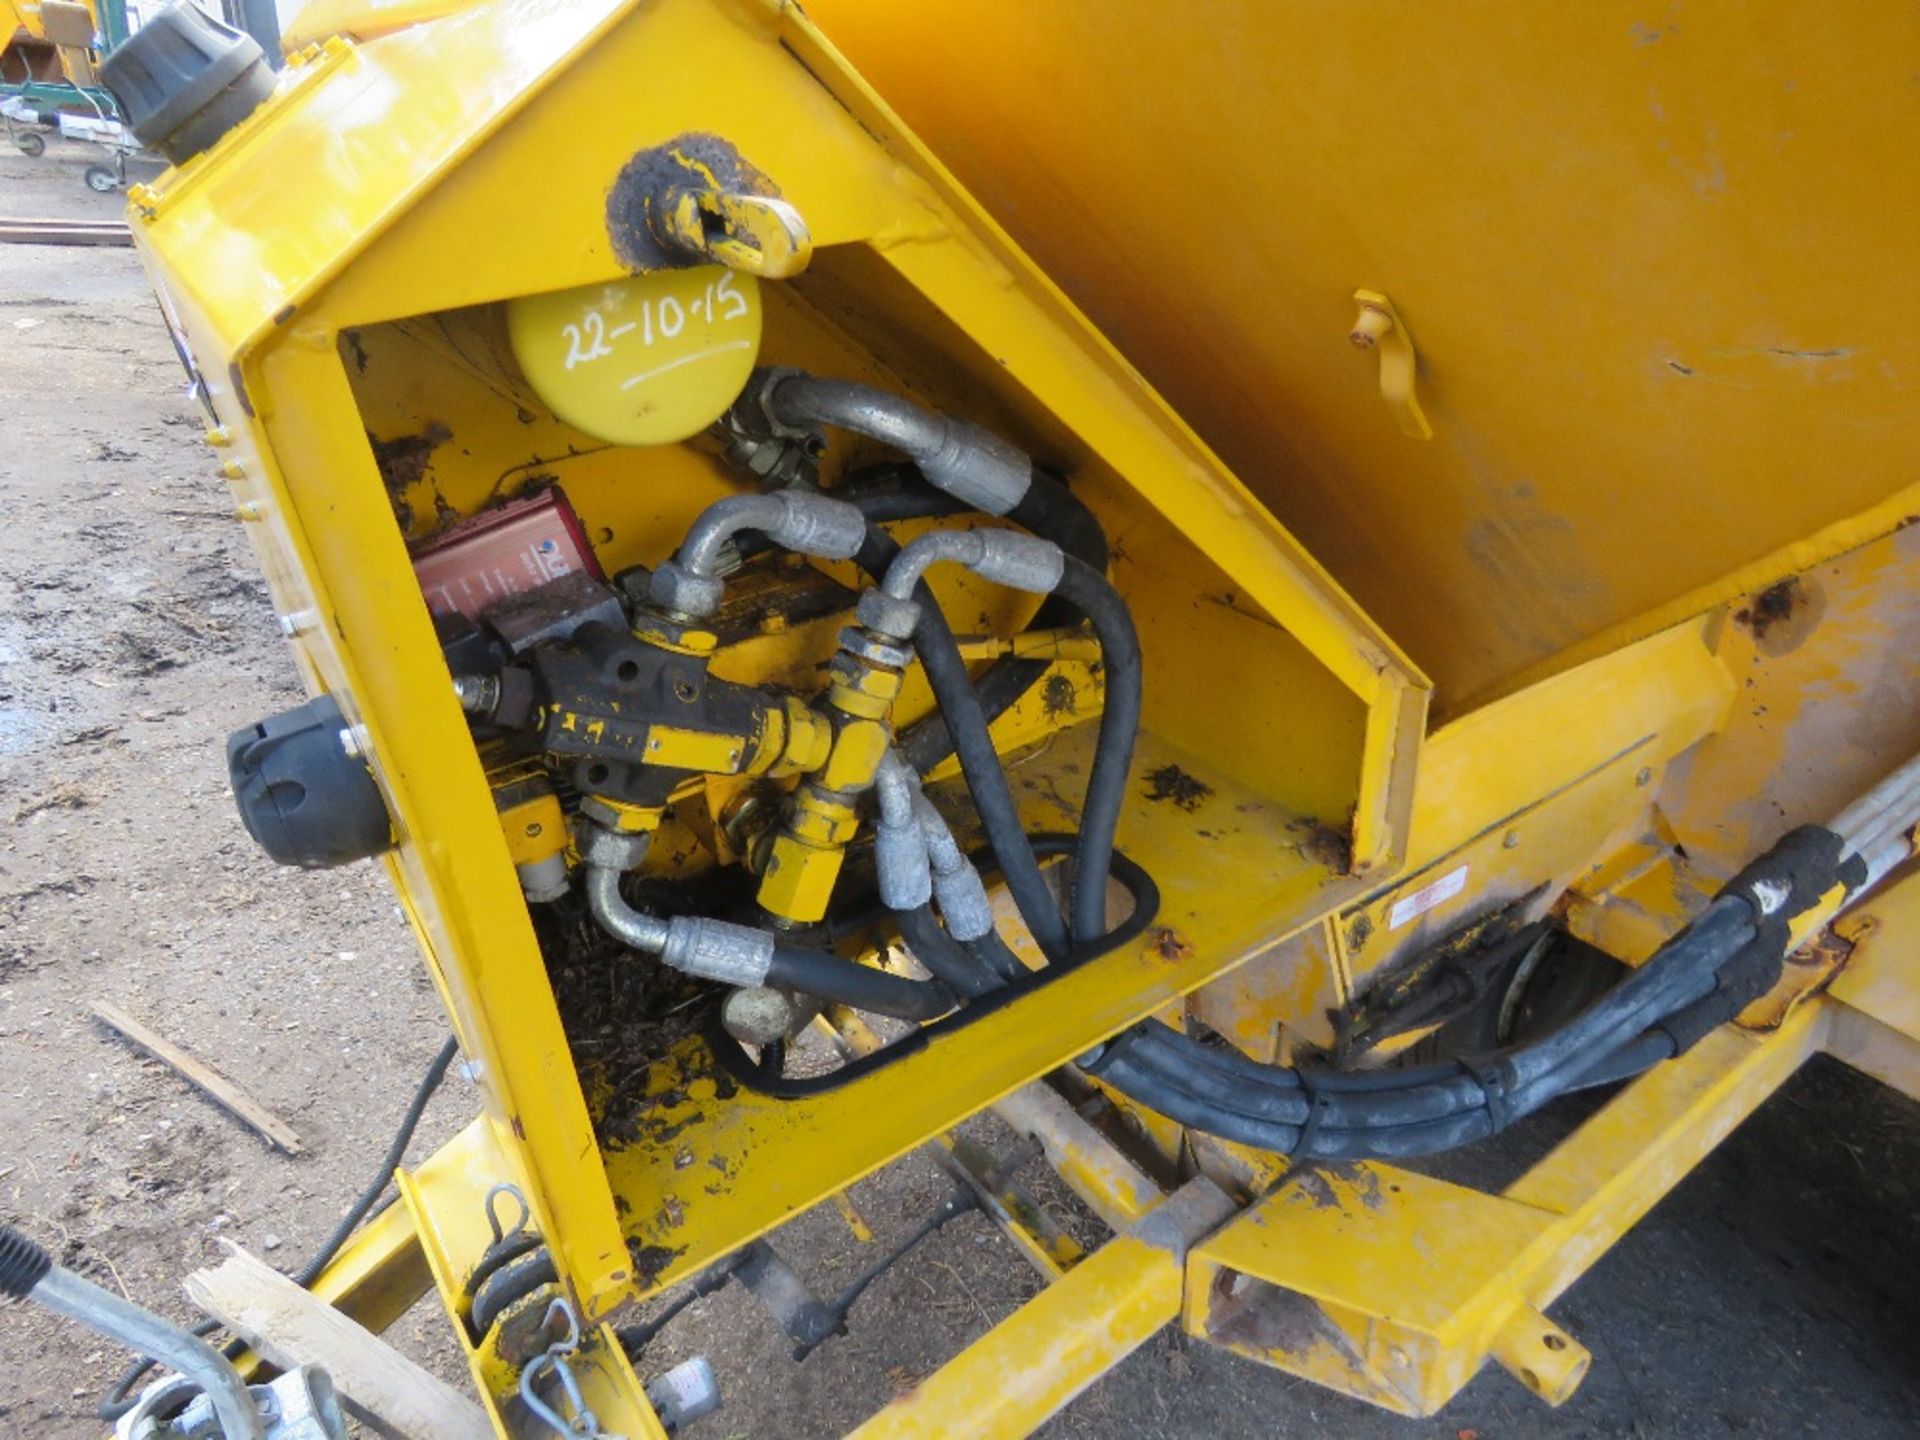 CHARITY LOT!! ECON SINGLE AXLED TOWED SALT SPREADER WITH WHEEL DRIVEN HYDRAULIC SYSTEM. UNUSED FOR - Image 11 of 13